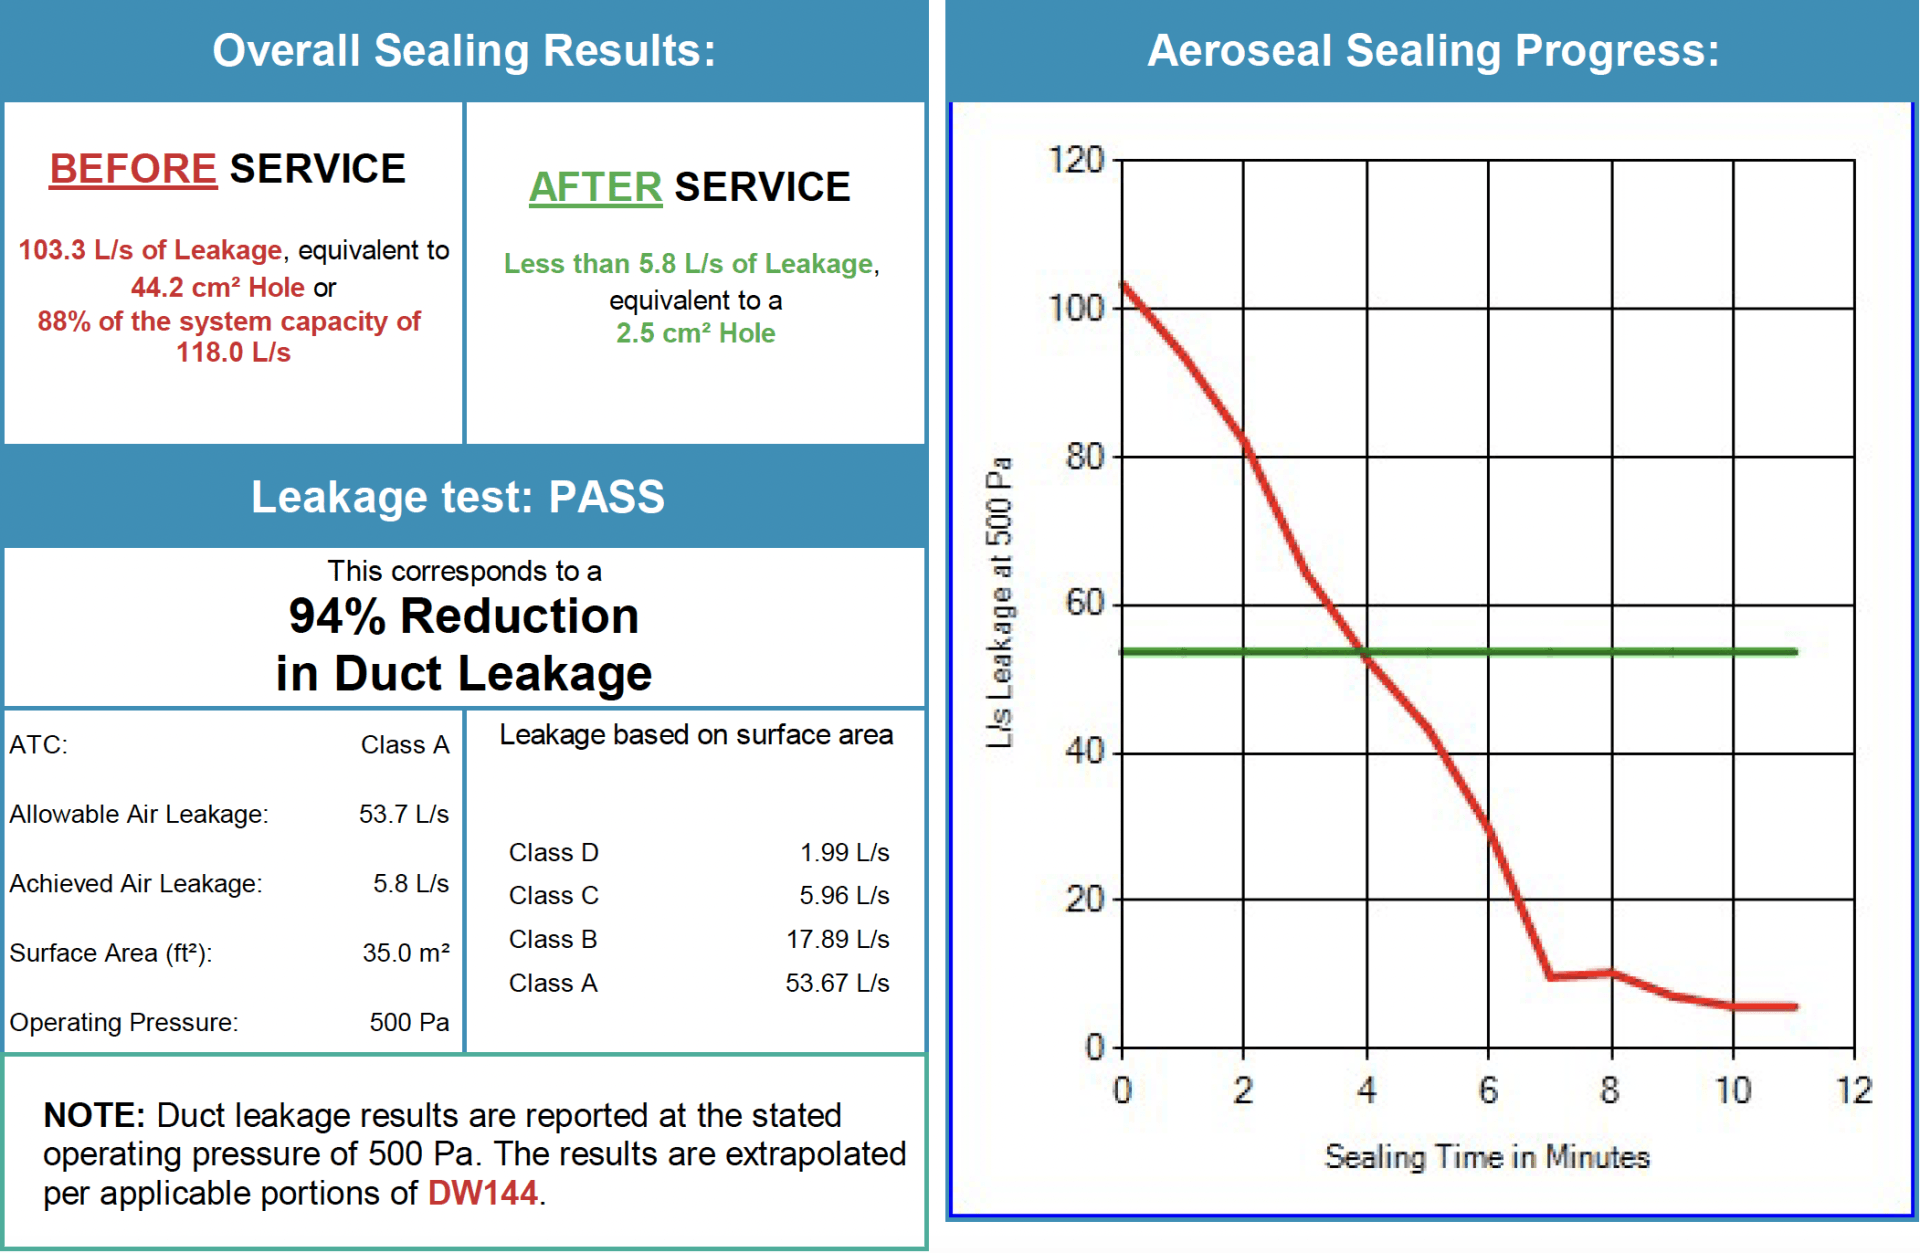 Aeroseal results at the ACC building, Auckland